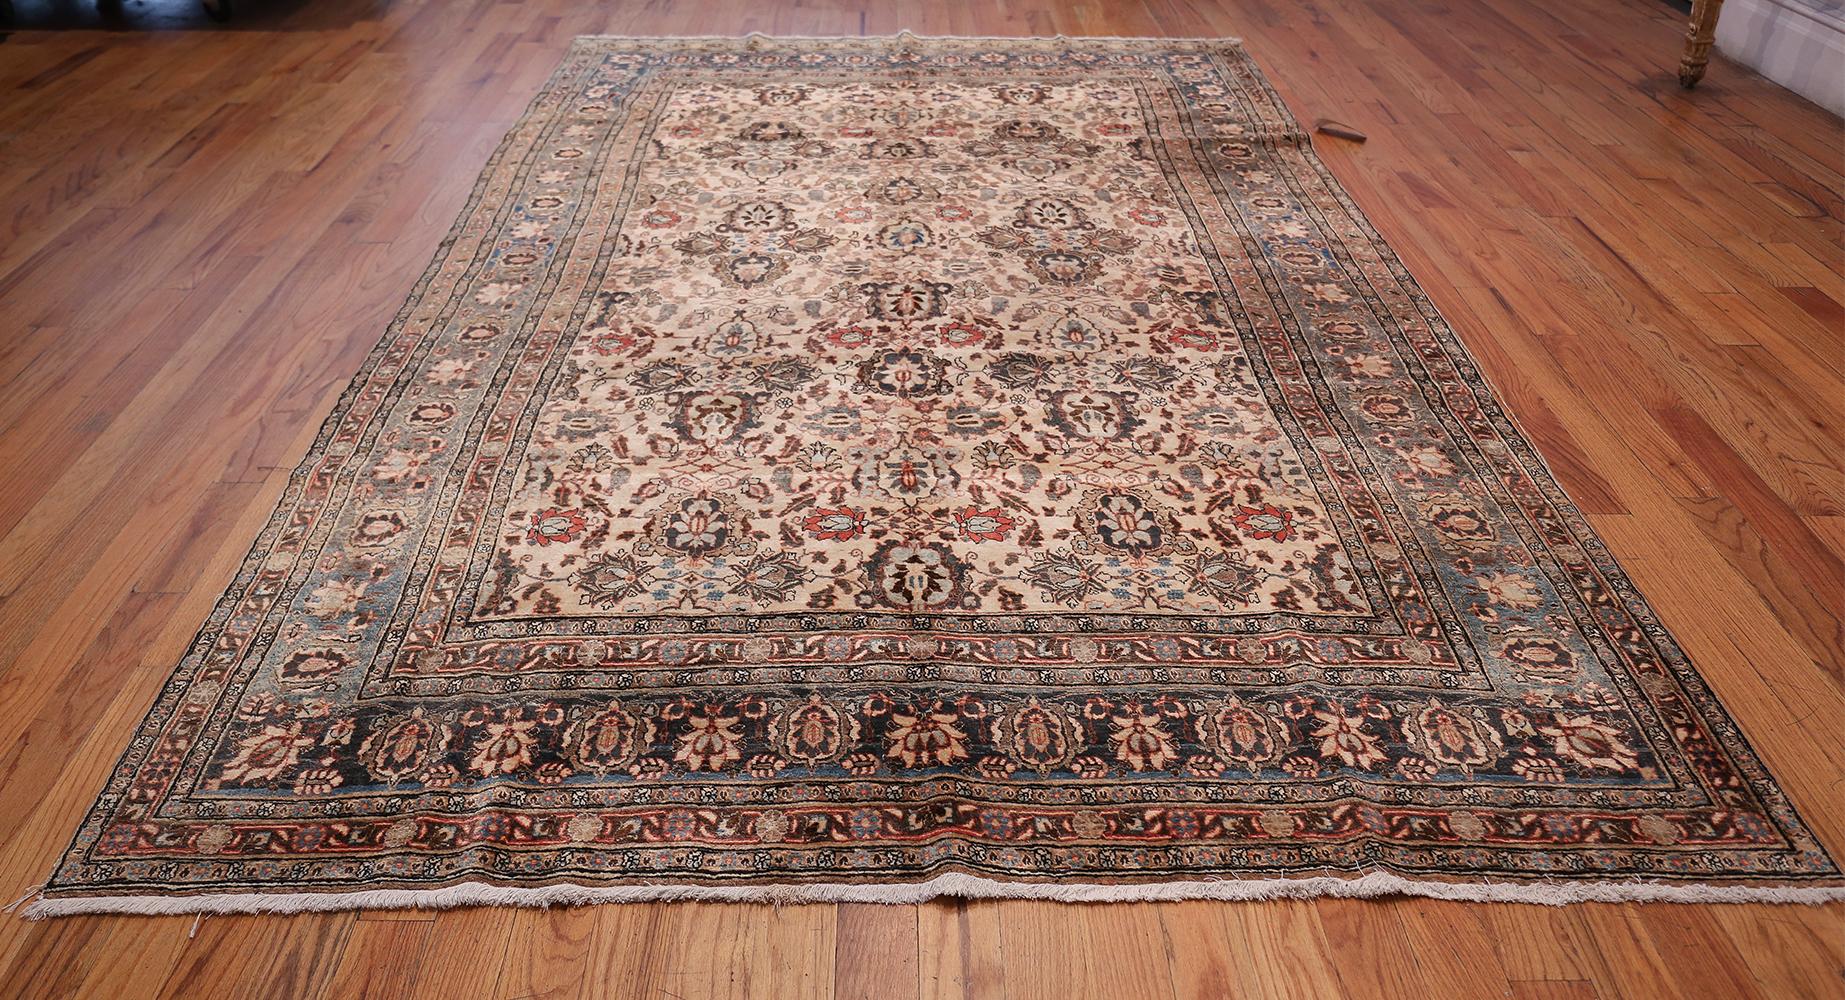 Finely woven ivory background colored antique Persian Tabriz rug, country of origin: Persia, circa early 20th century. Size: 6 ft 5 in x 10 ft 5 in (1.96 m x 3.17 m)

A cultural center and capital of the northwestern Iranian province of Azerbaijan,